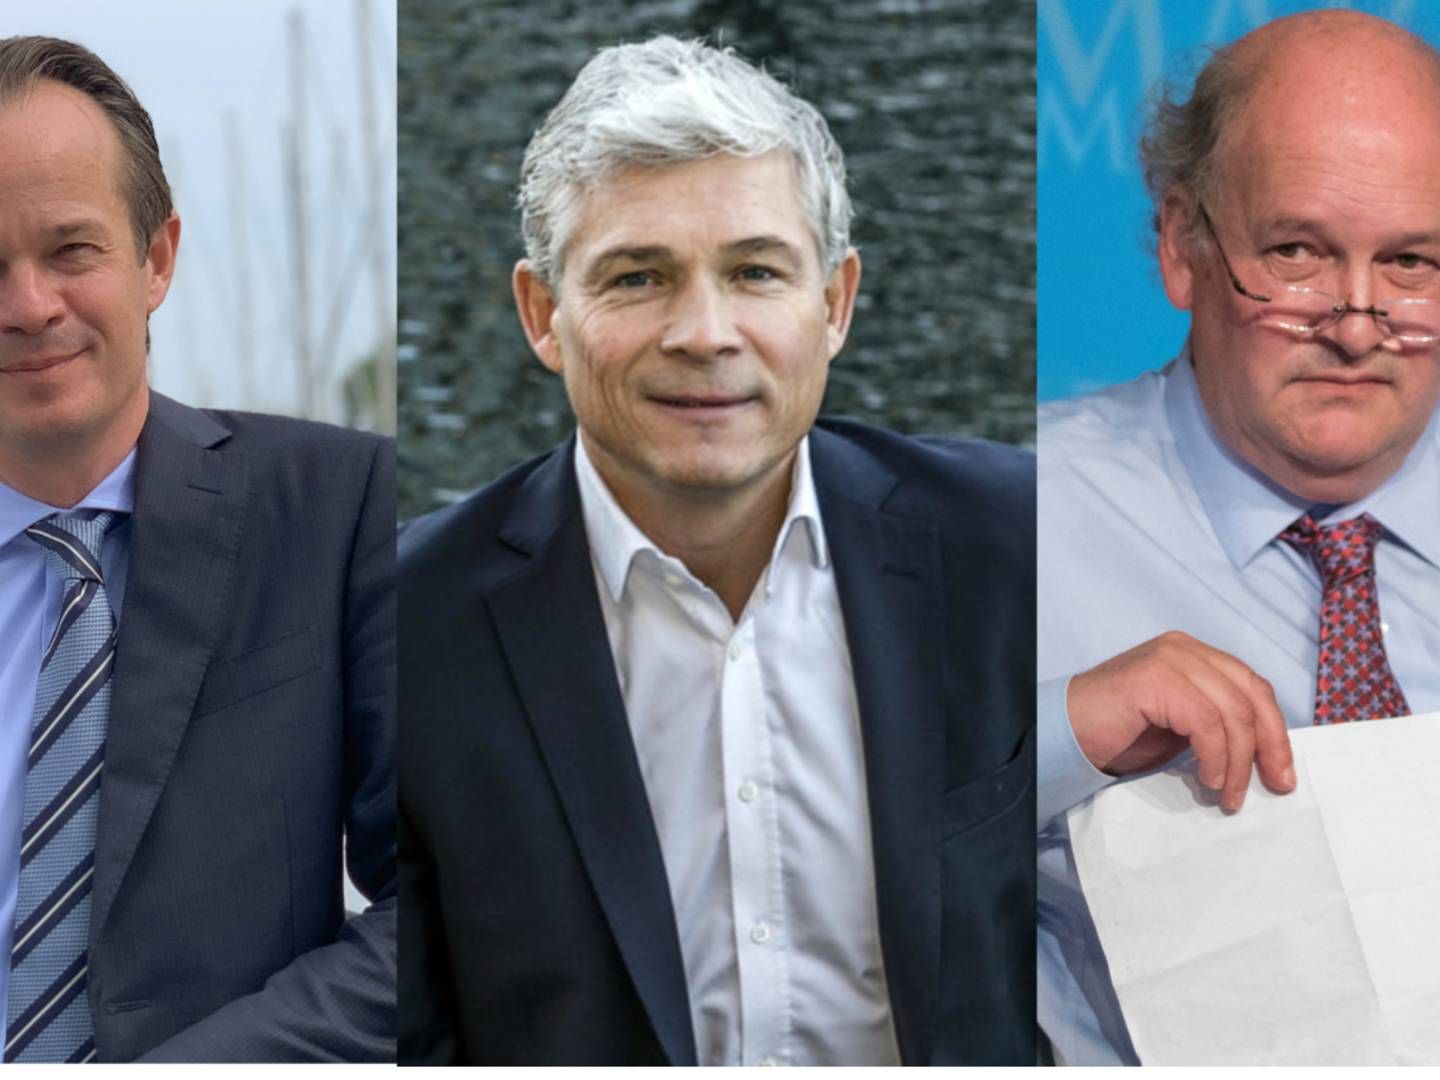 Hafnia CEO Mikael Skov (mid) has had the most cause for celebration in the first half of 2022. Torm CEO Jacob Meldgaard (left) and Scorpio Tankers CEO Robert Bugbee (right). | Photo: Collage: Torm/PR / Hafnia/PR / MarineMoney/PR